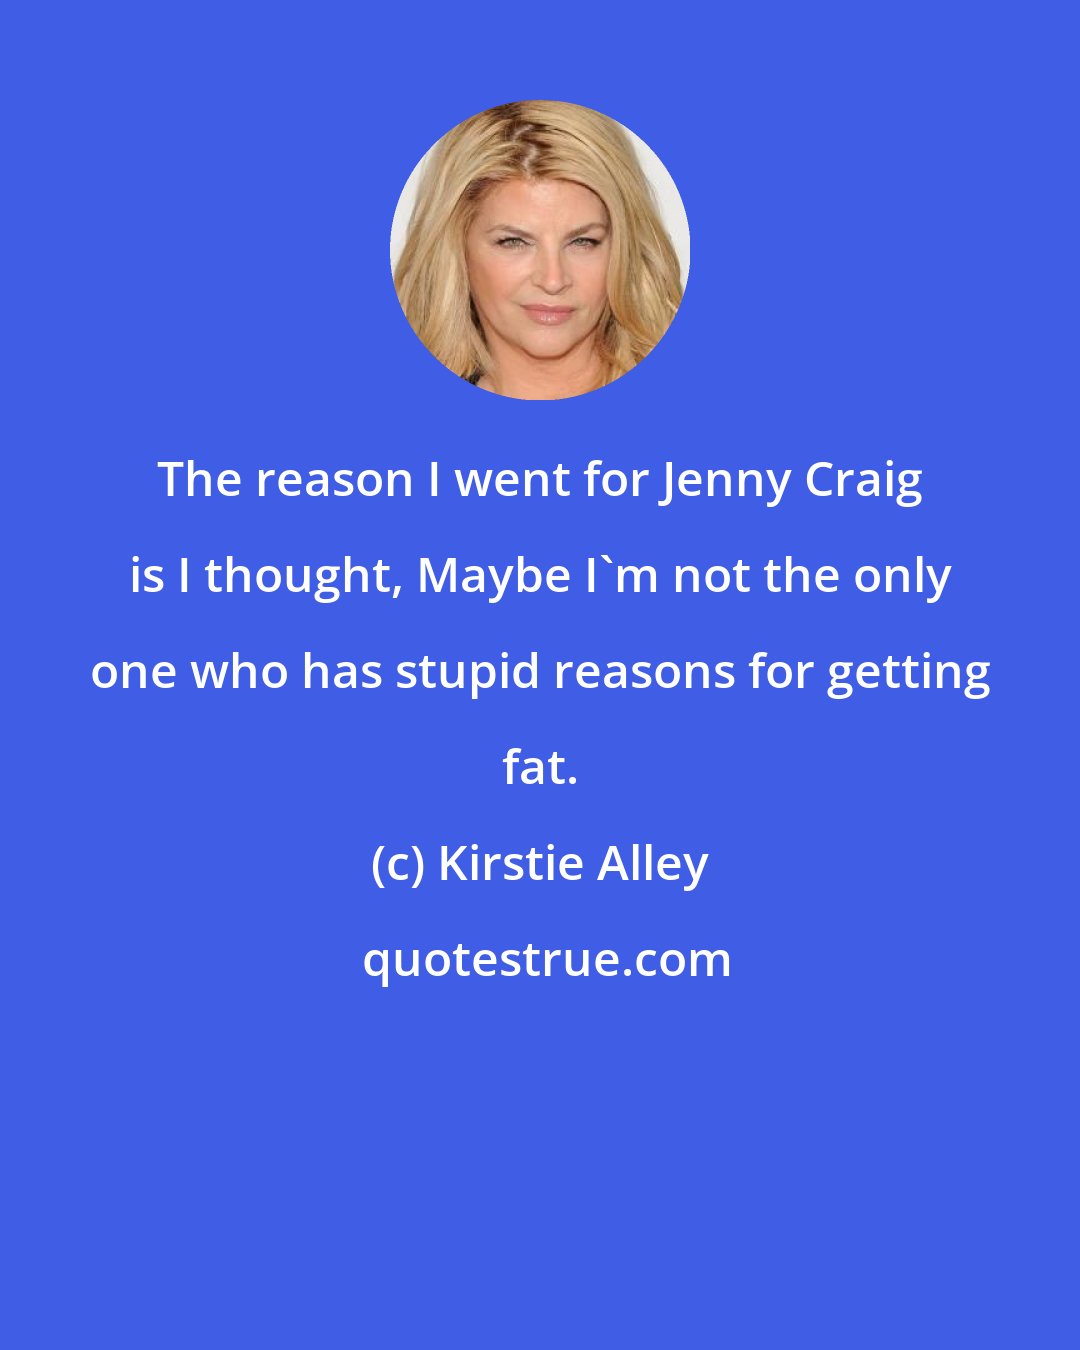 Kirstie Alley: The reason I went for Jenny Craig is I thought, Maybe I'm not the only one who has stupid reasons for getting fat.